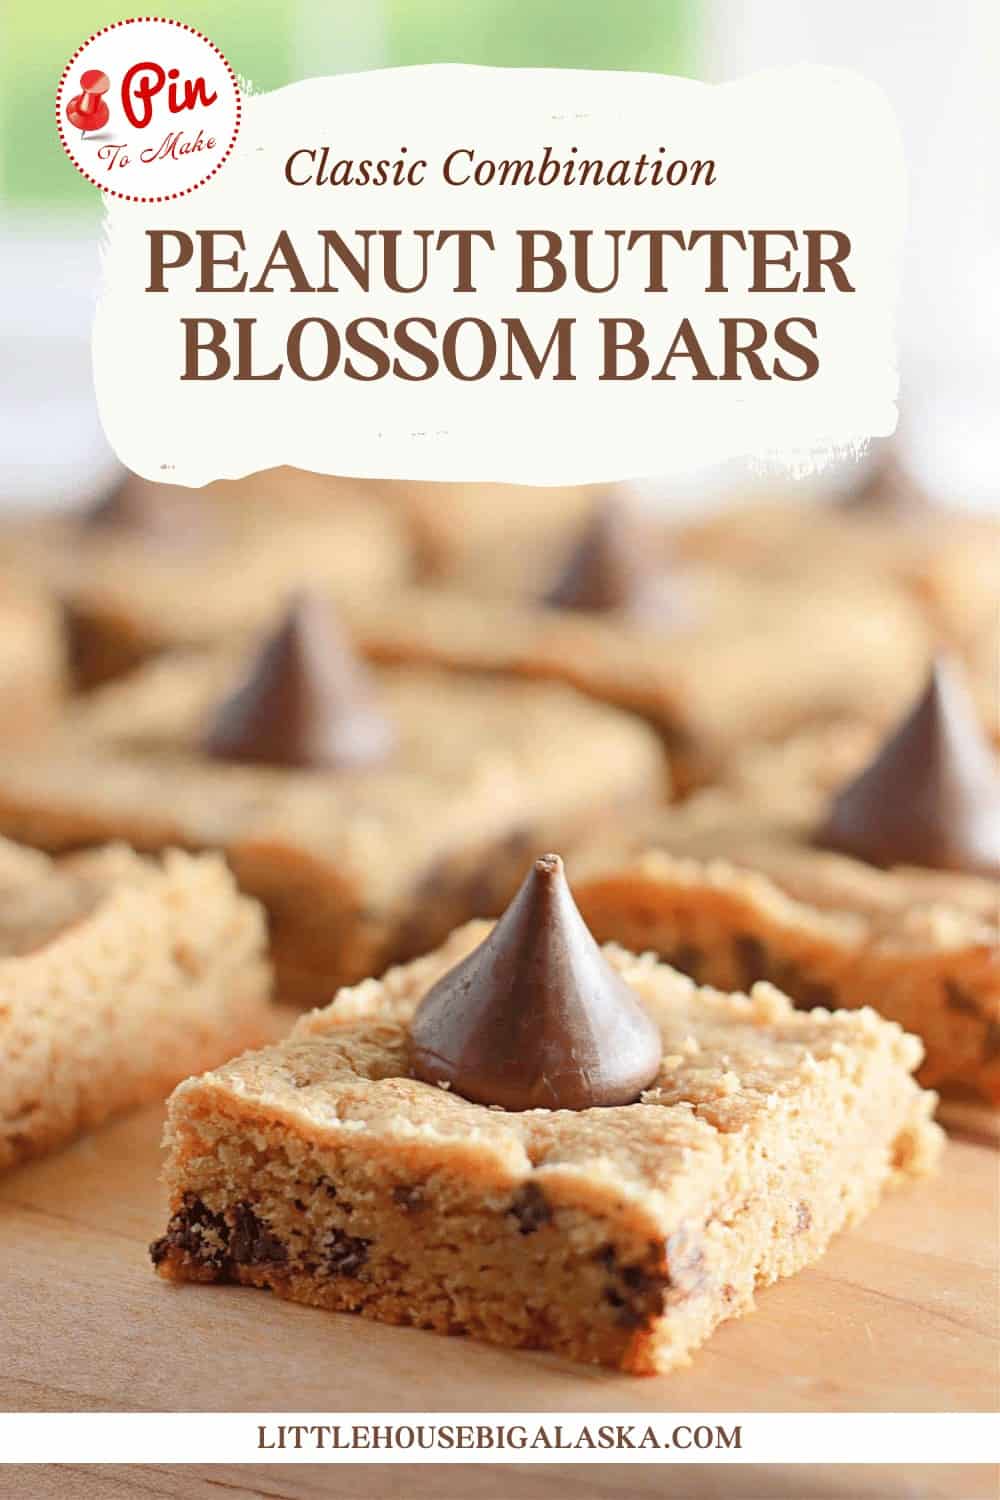 Peanut butter blossom bars on a wooden surface with a chocolate kiss on top.